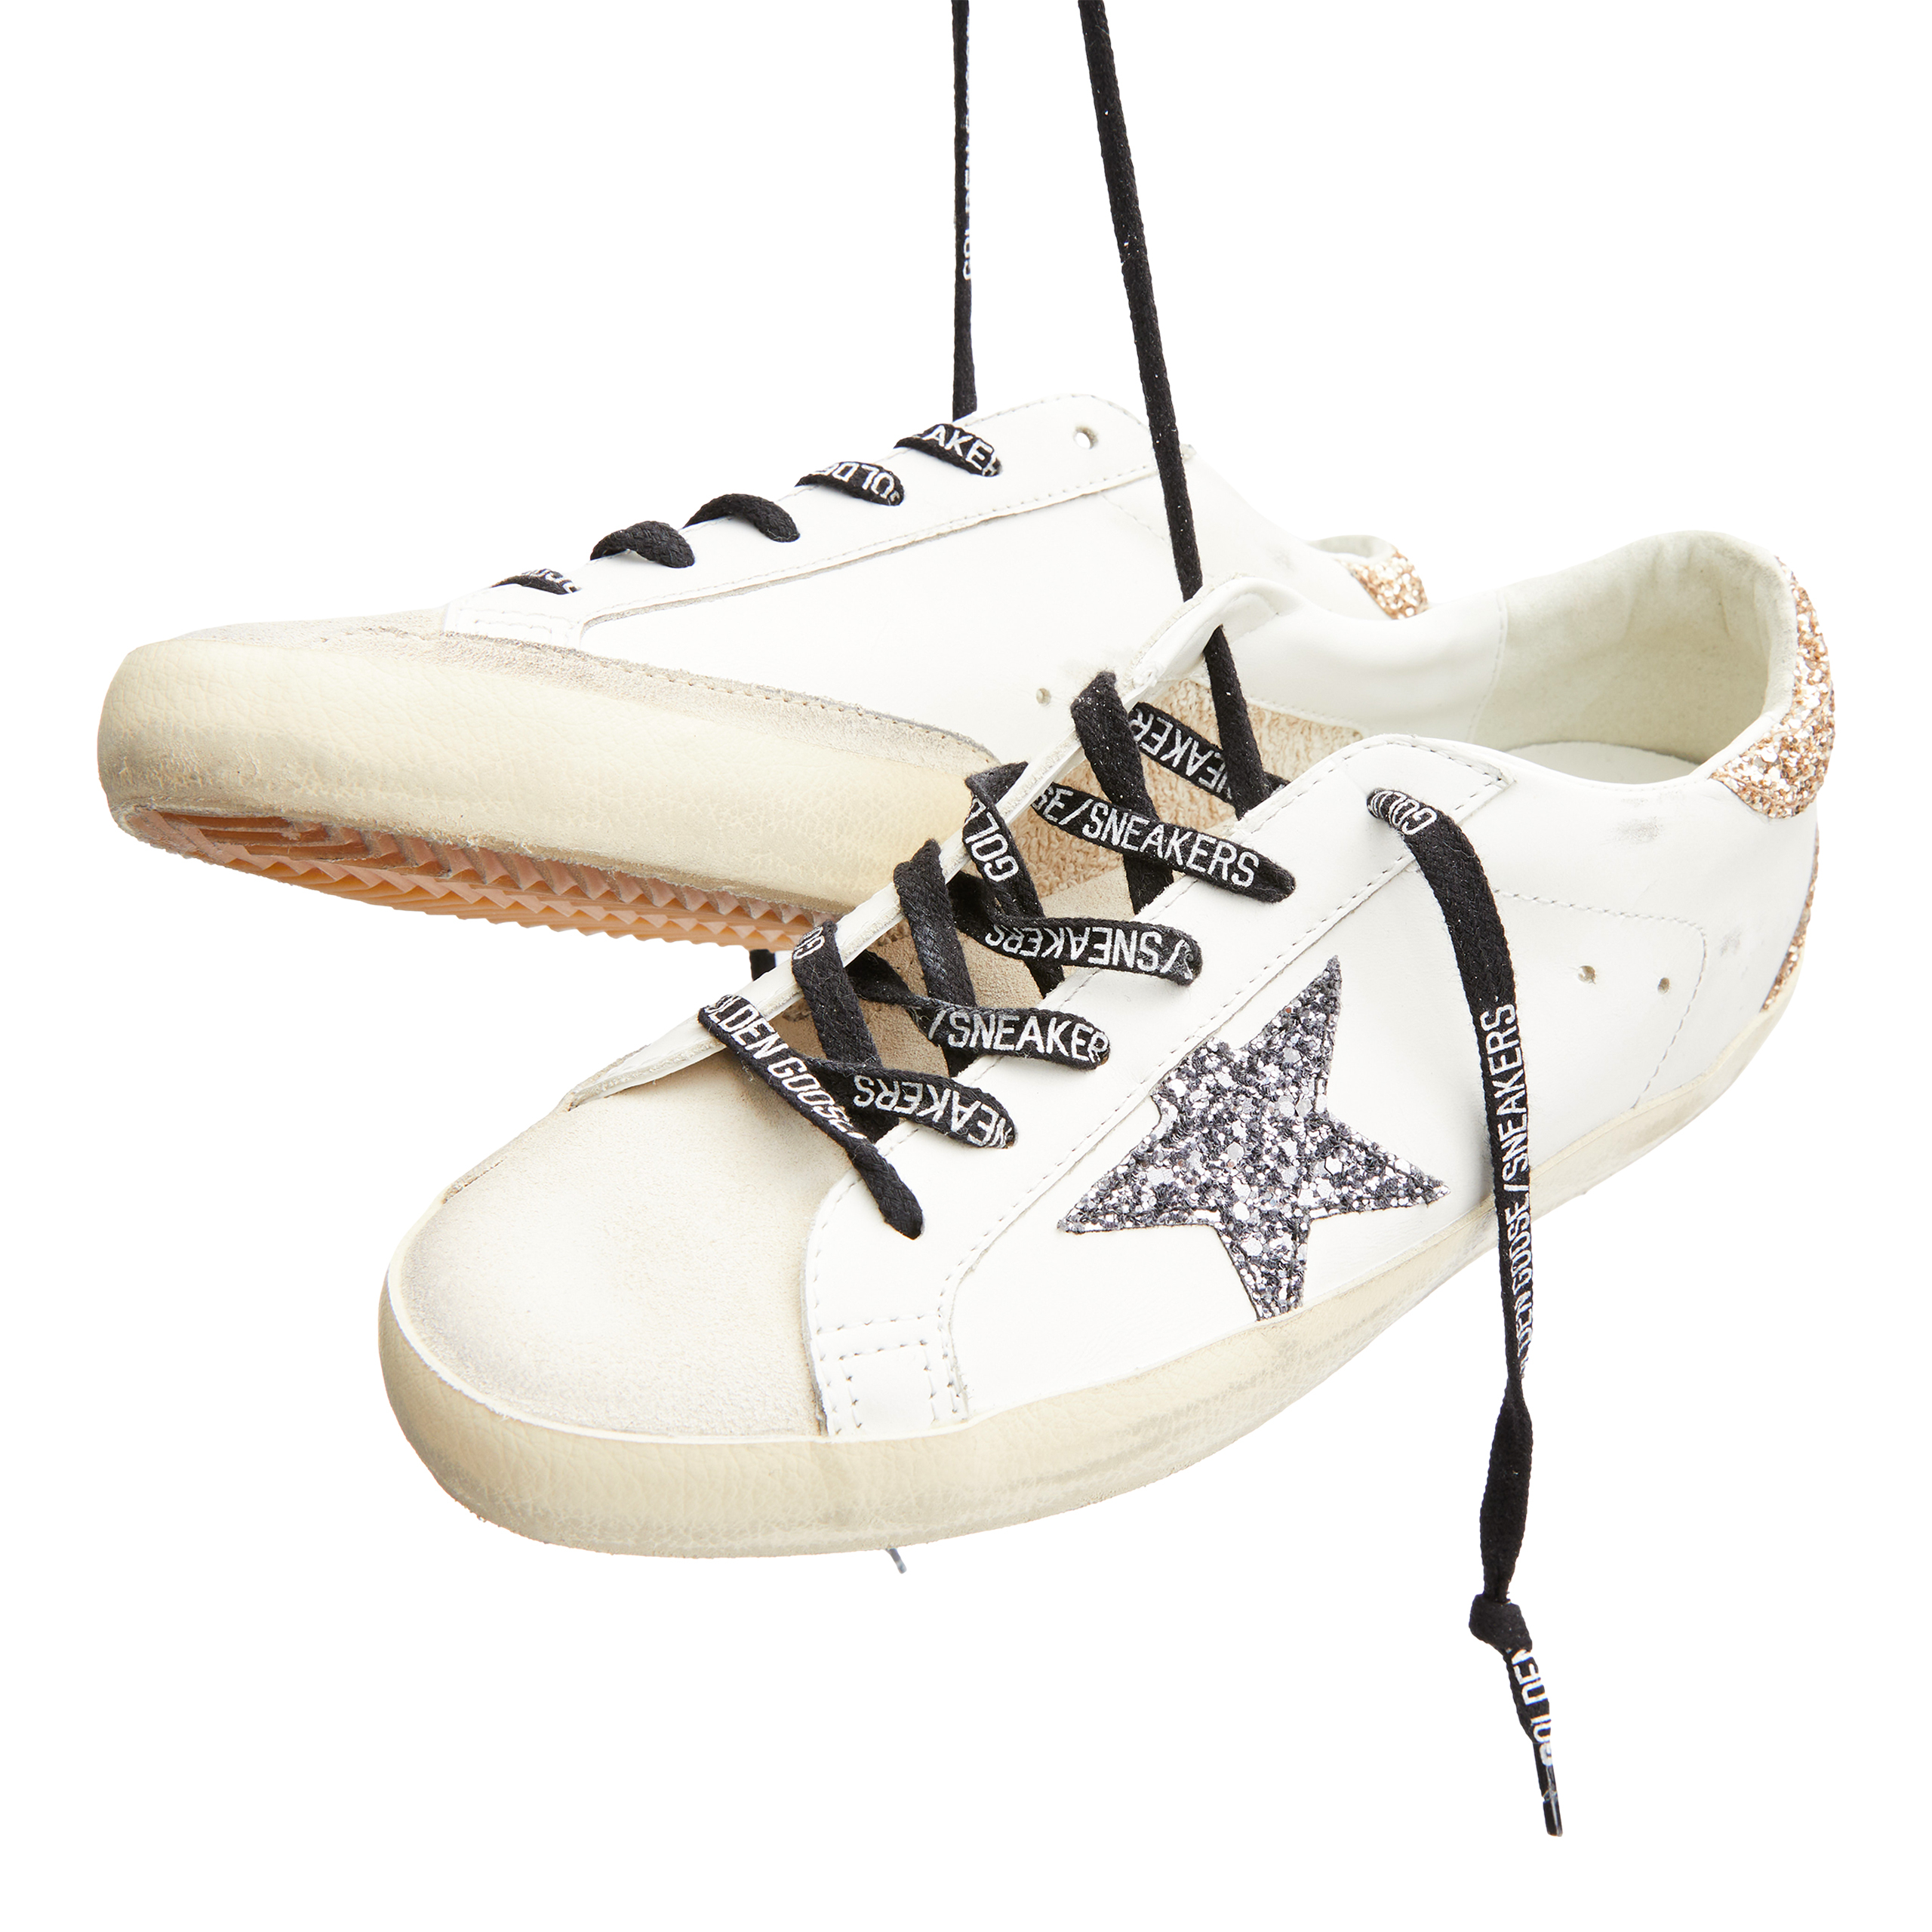 None Golden Goose Deluxe Brand GWF00102/F005358/82532, размер 36;41 GWF00102/F005358/82532 - фото 6